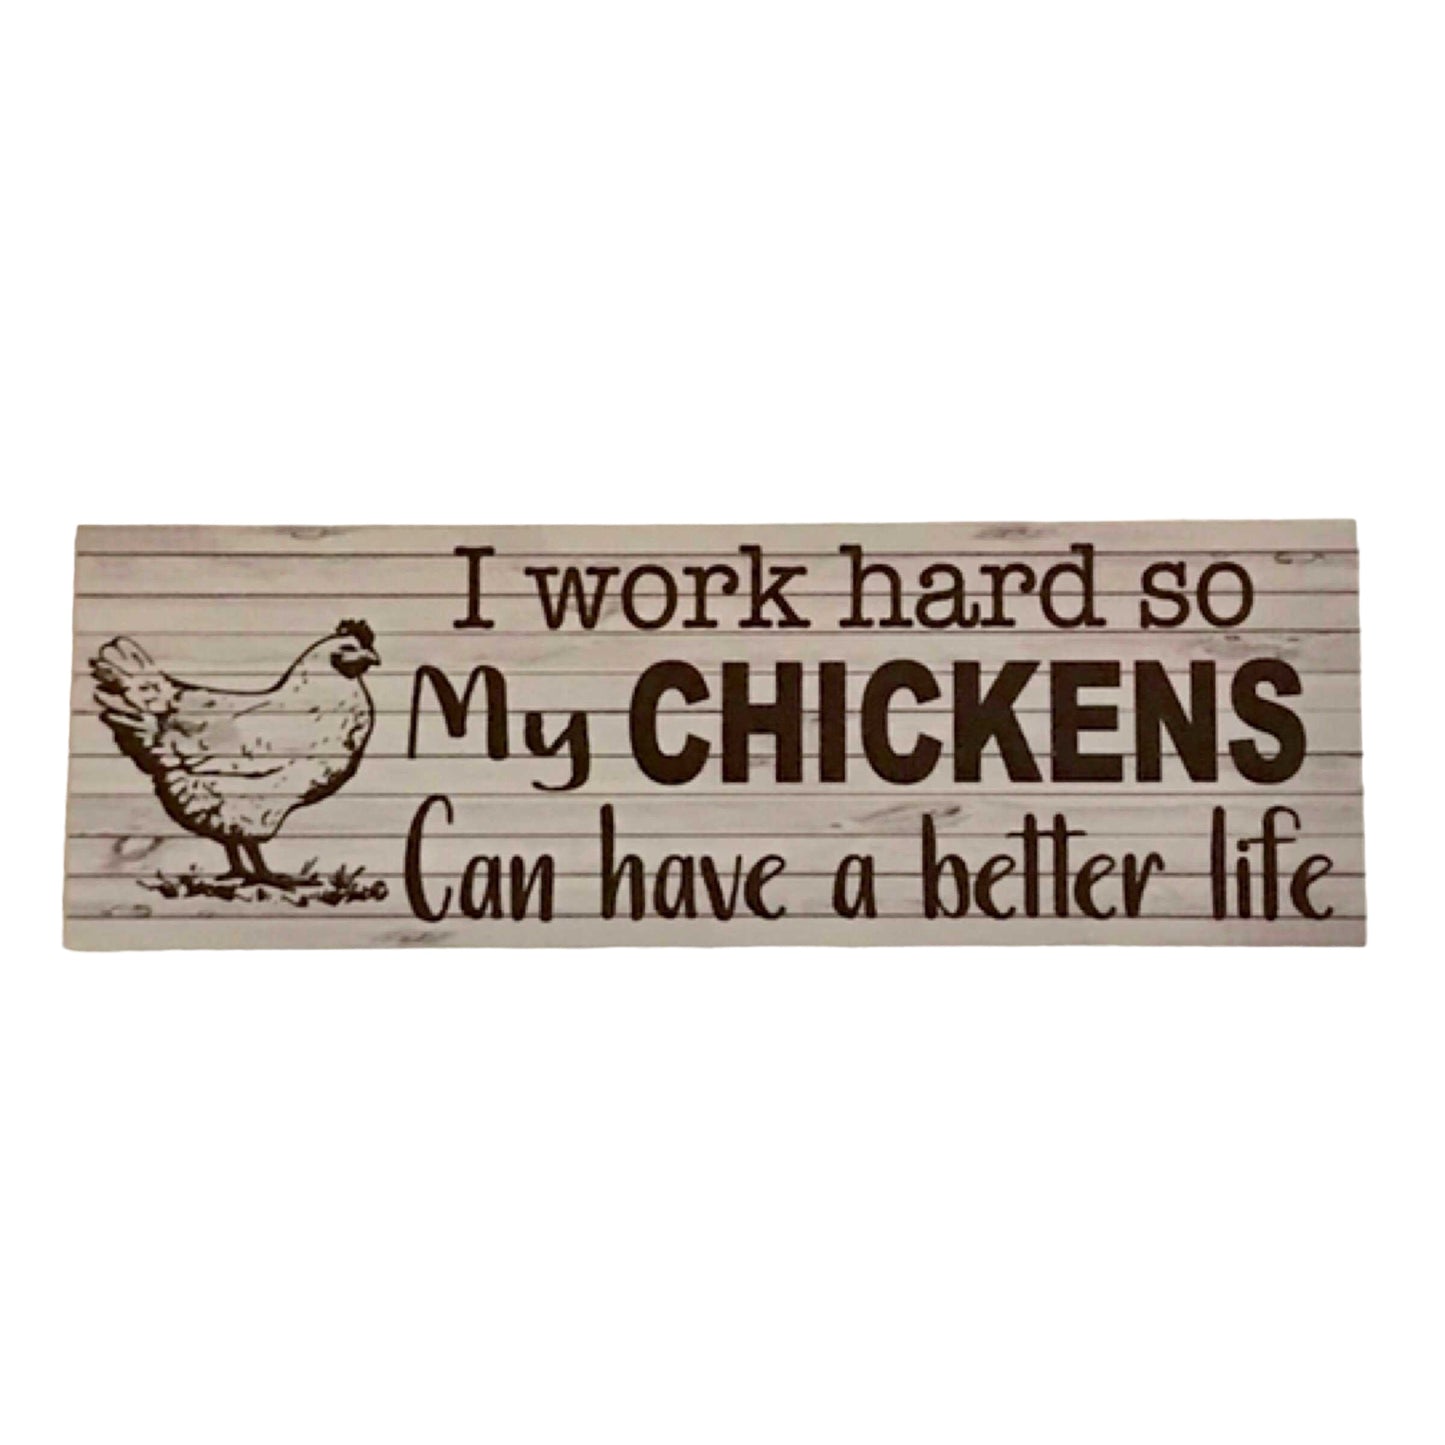 Chickens I work so hard so my can have a better life Sign - The Renmy Store Homewares & Gifts 